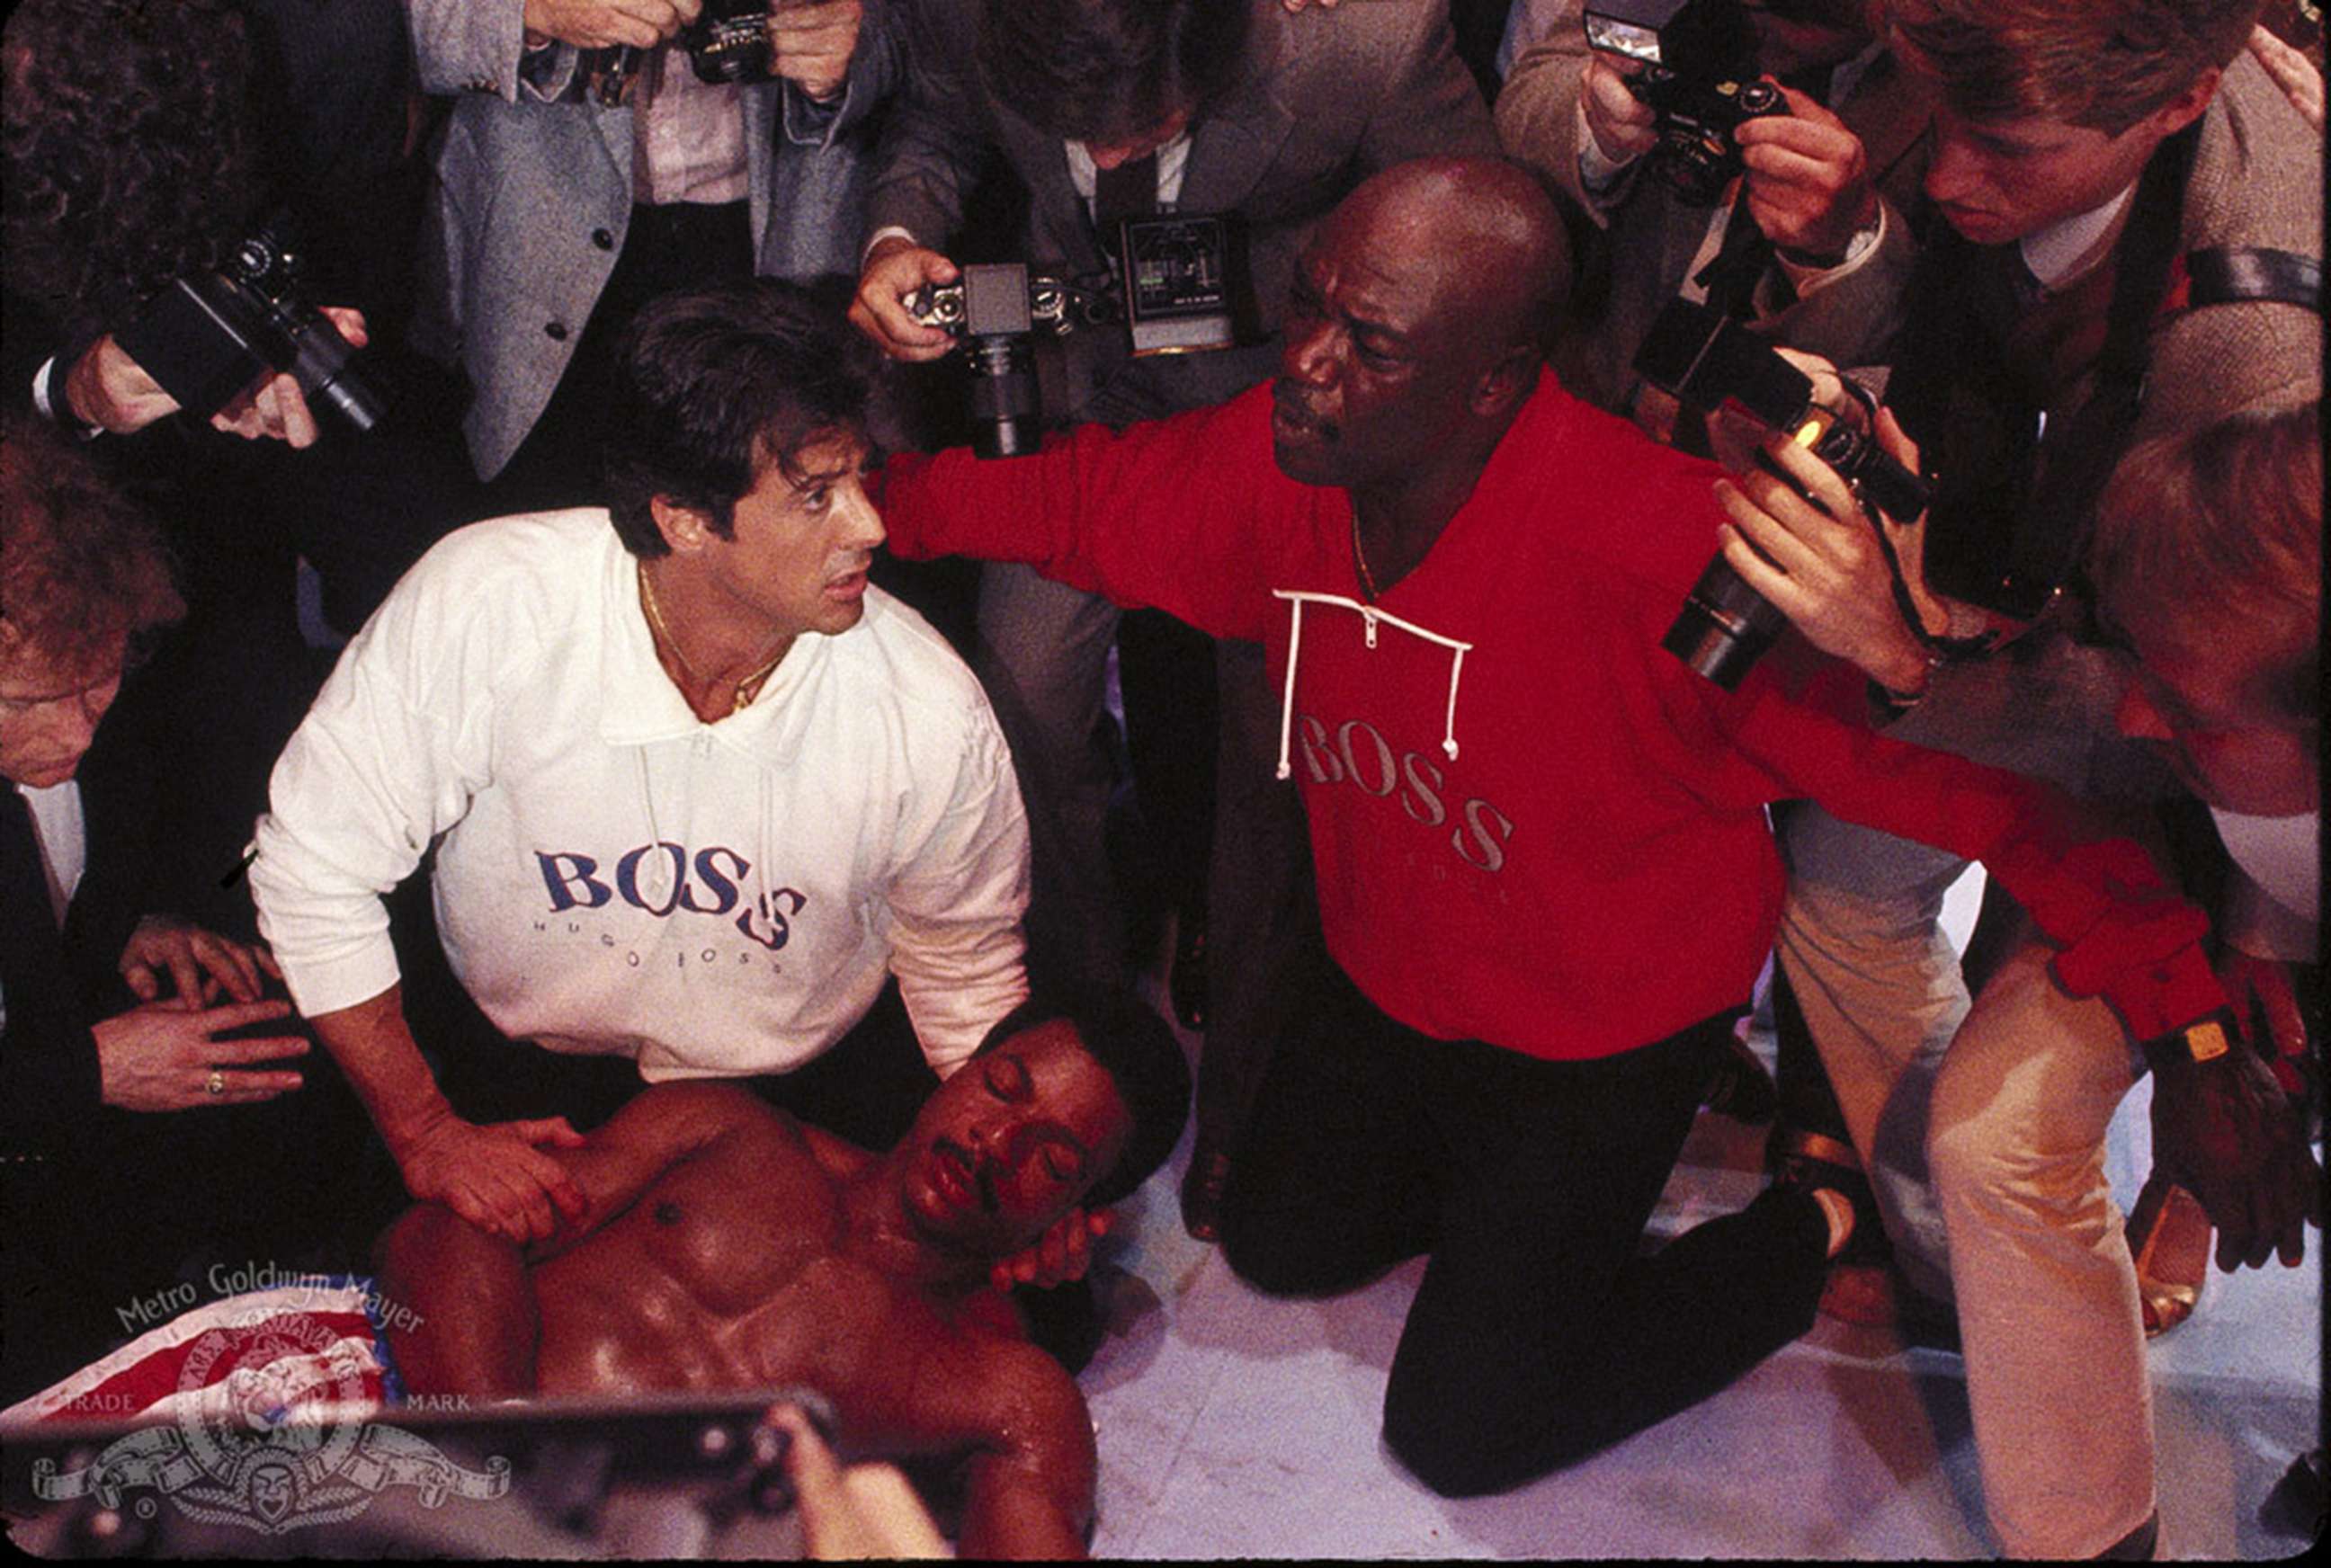 PHOTO: Sylvester Stallone, Carl Weathers, and Tony Burton in a scene from "Rocky IV."